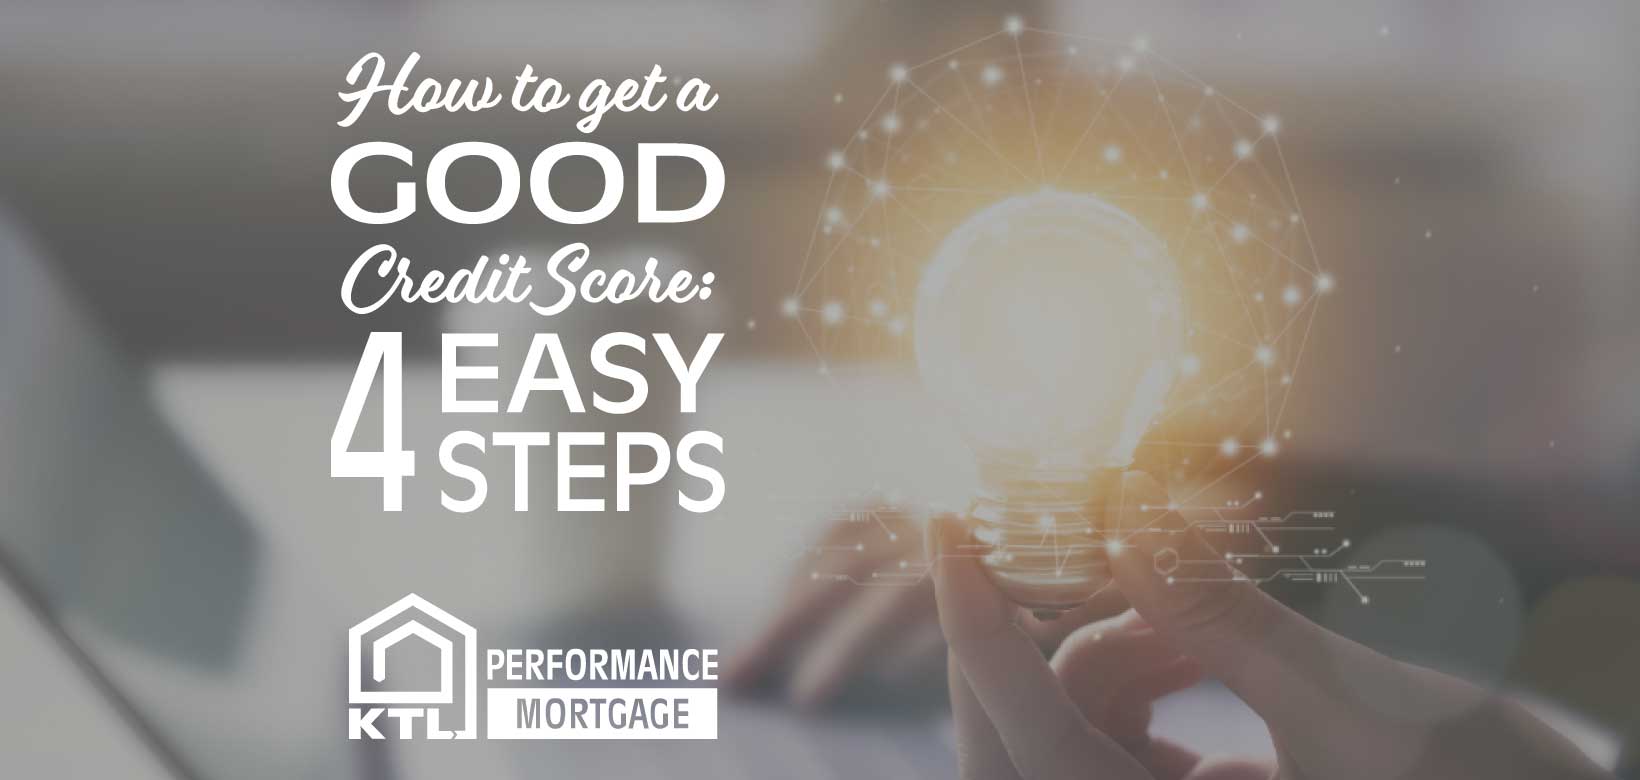 How-to-get-a-good-credit-score